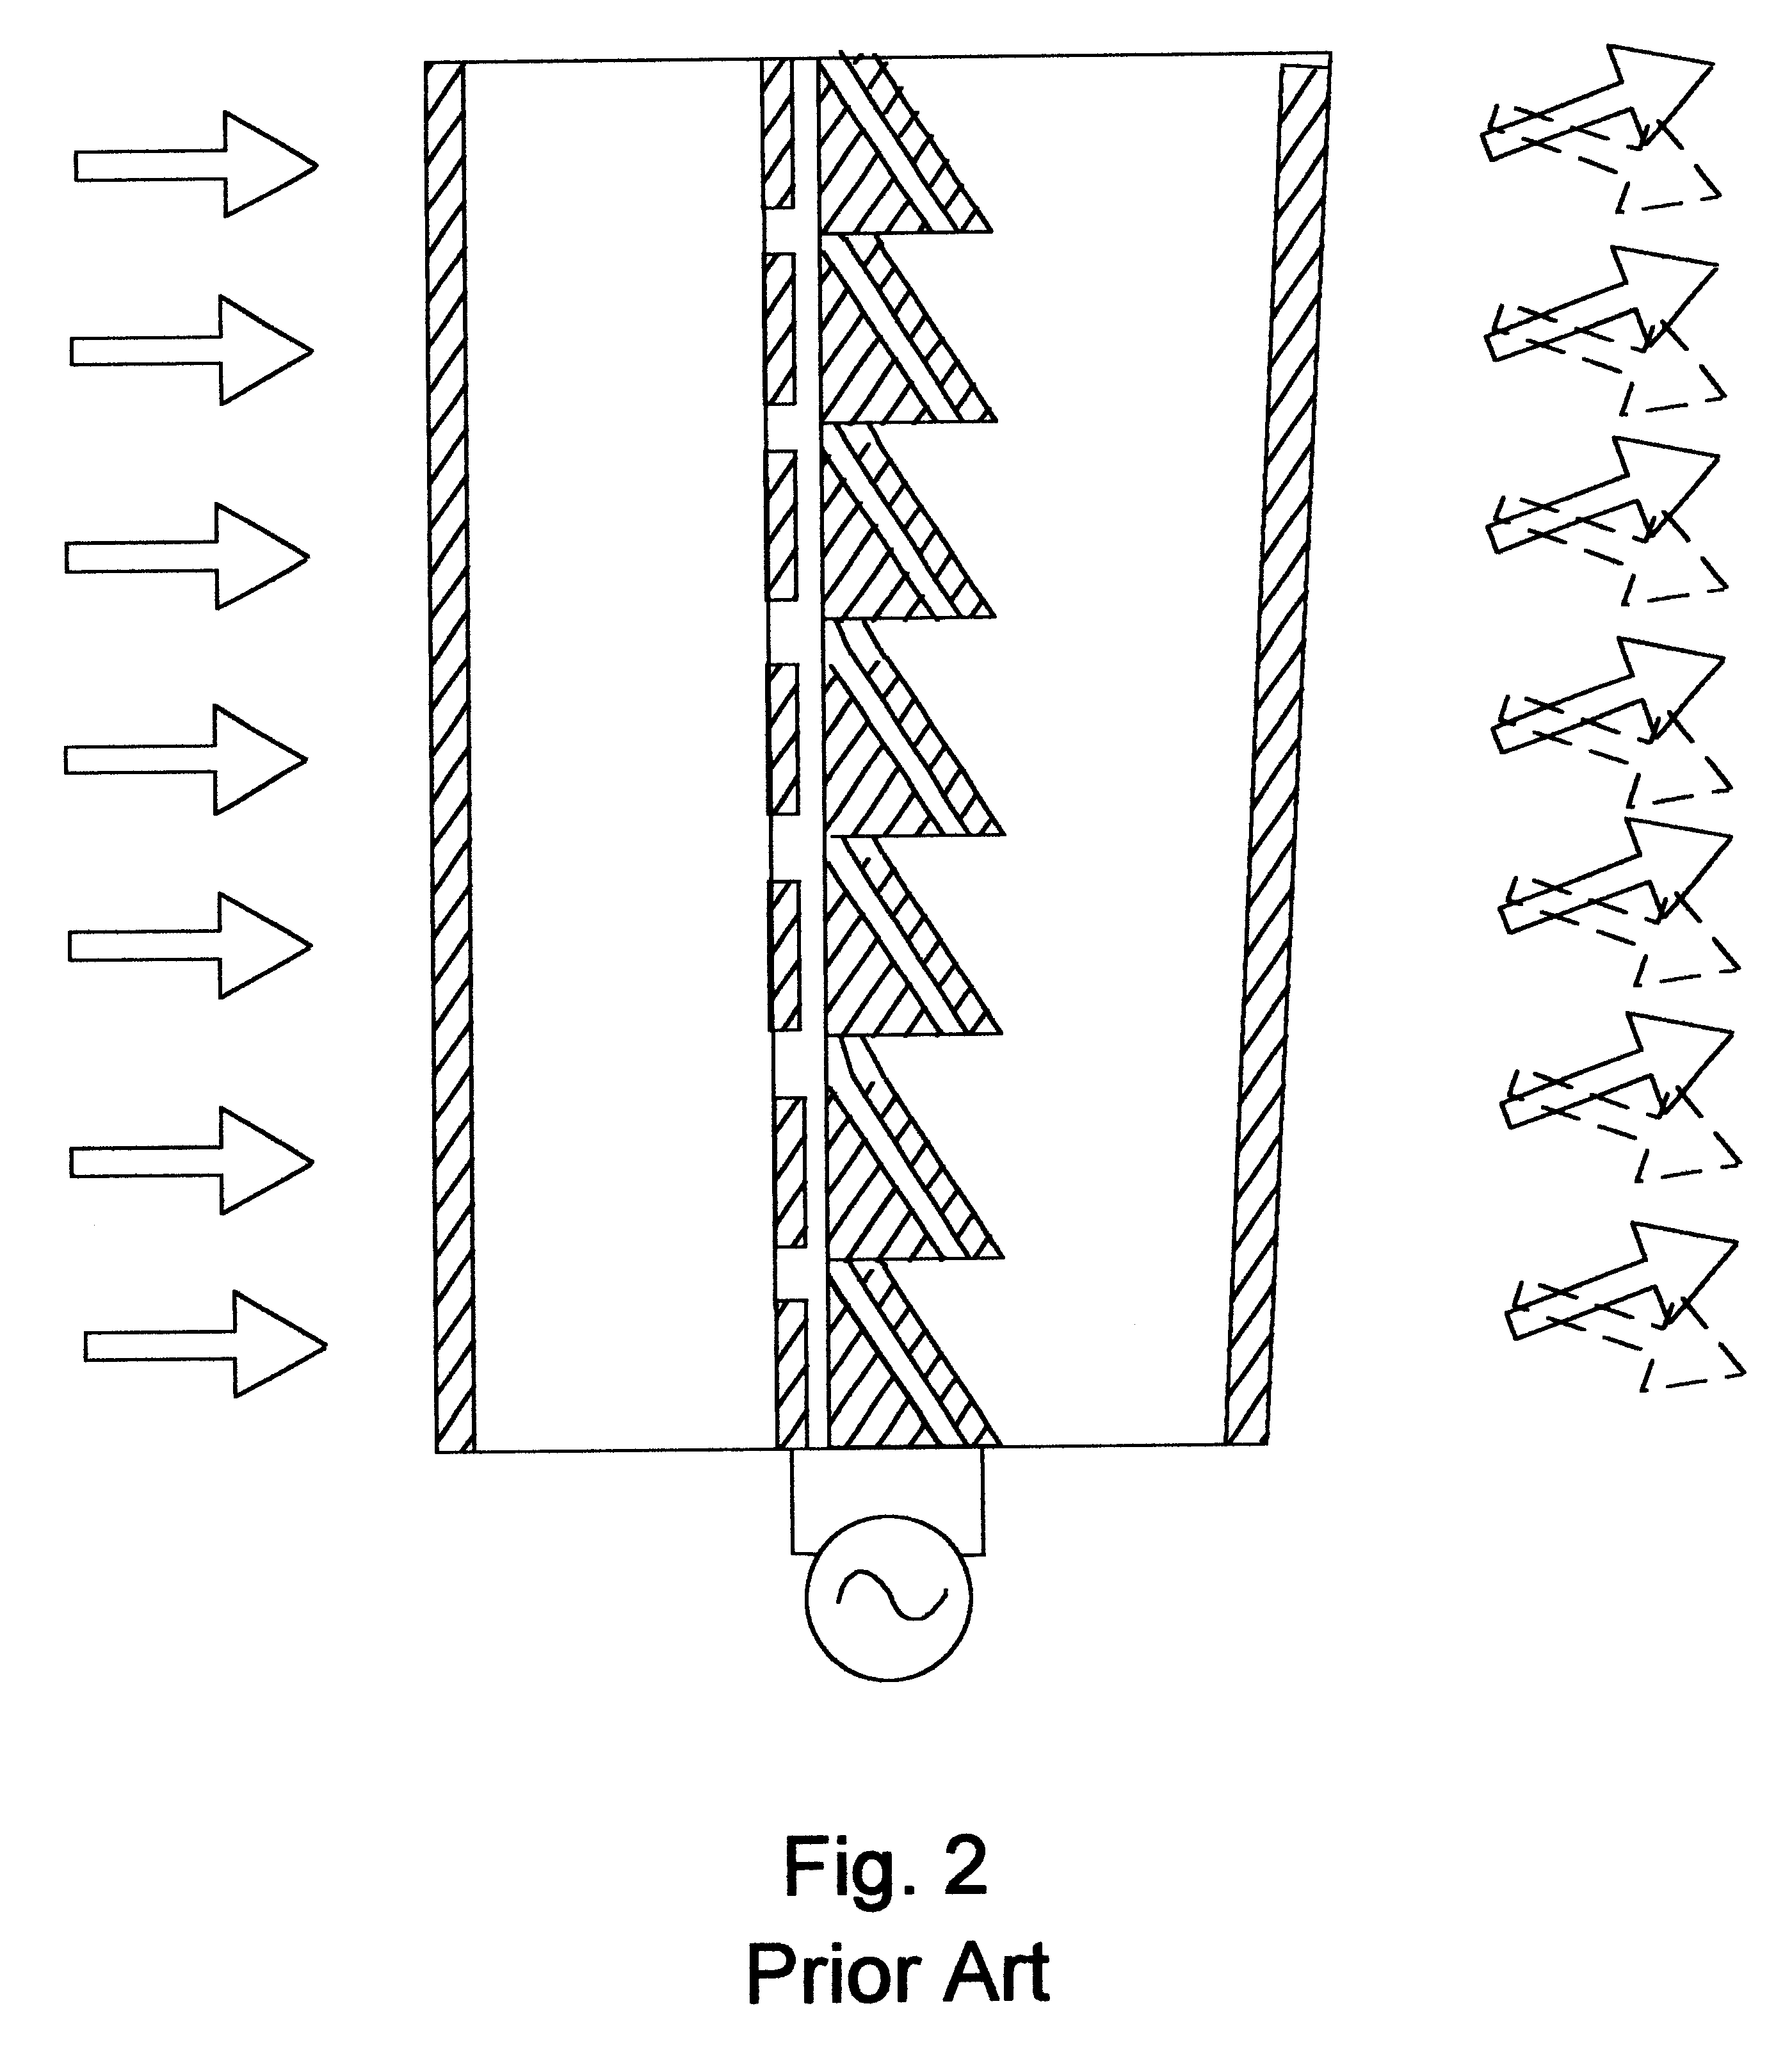 Electro-optic apparatus and process for multi-frequency variable refraction with minimized dispersion